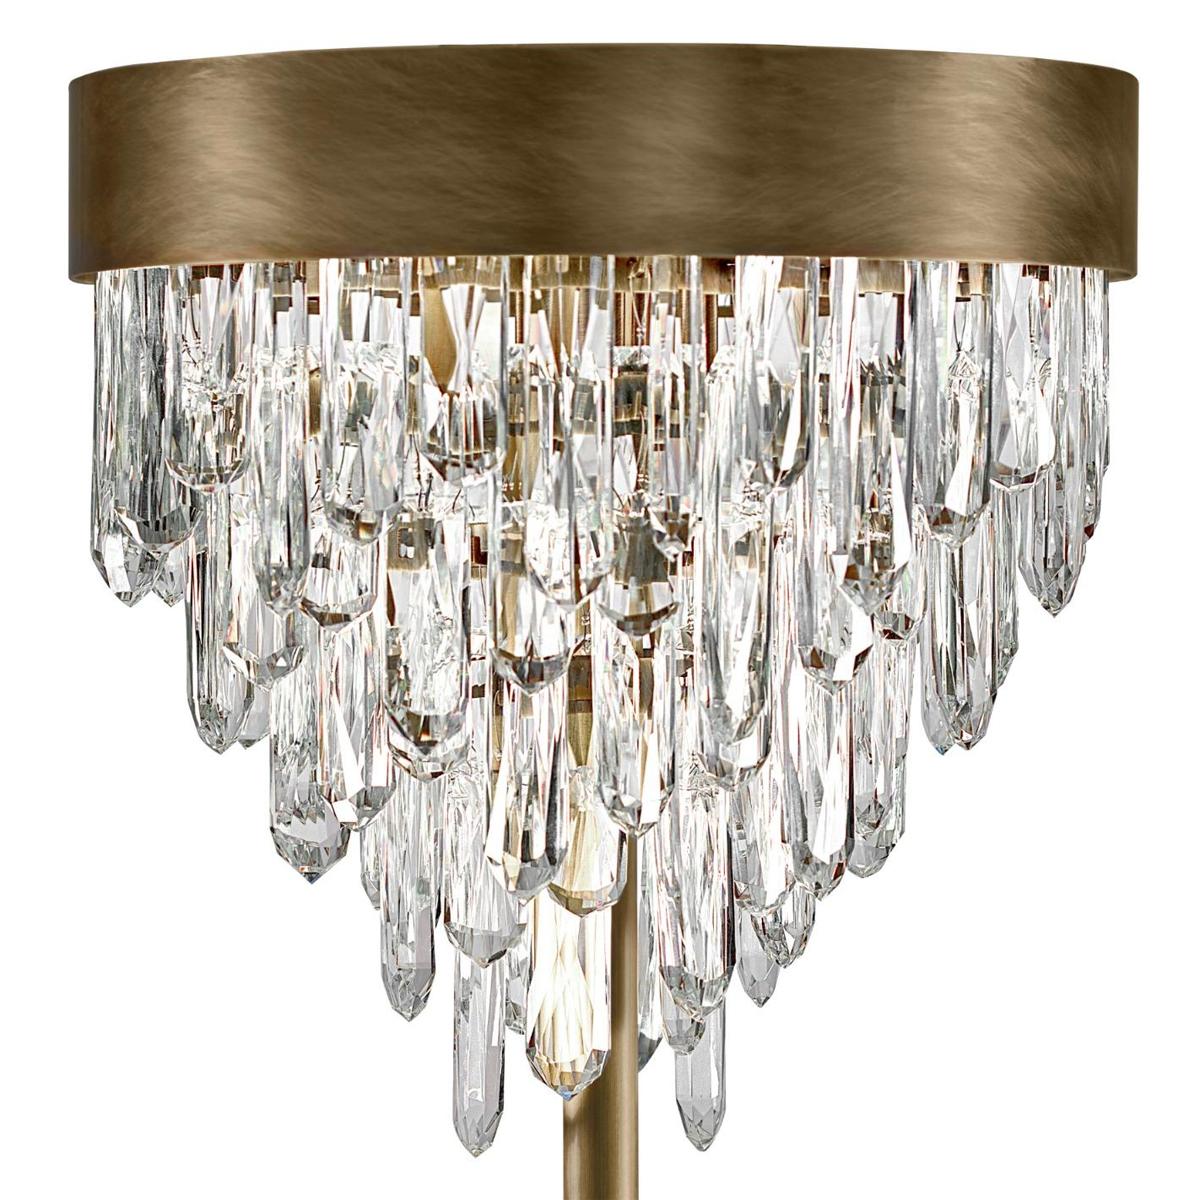 Crystal Sticks Floor Lamp in Antique Brushed Brass In New Condition For Sale In Paris, FR